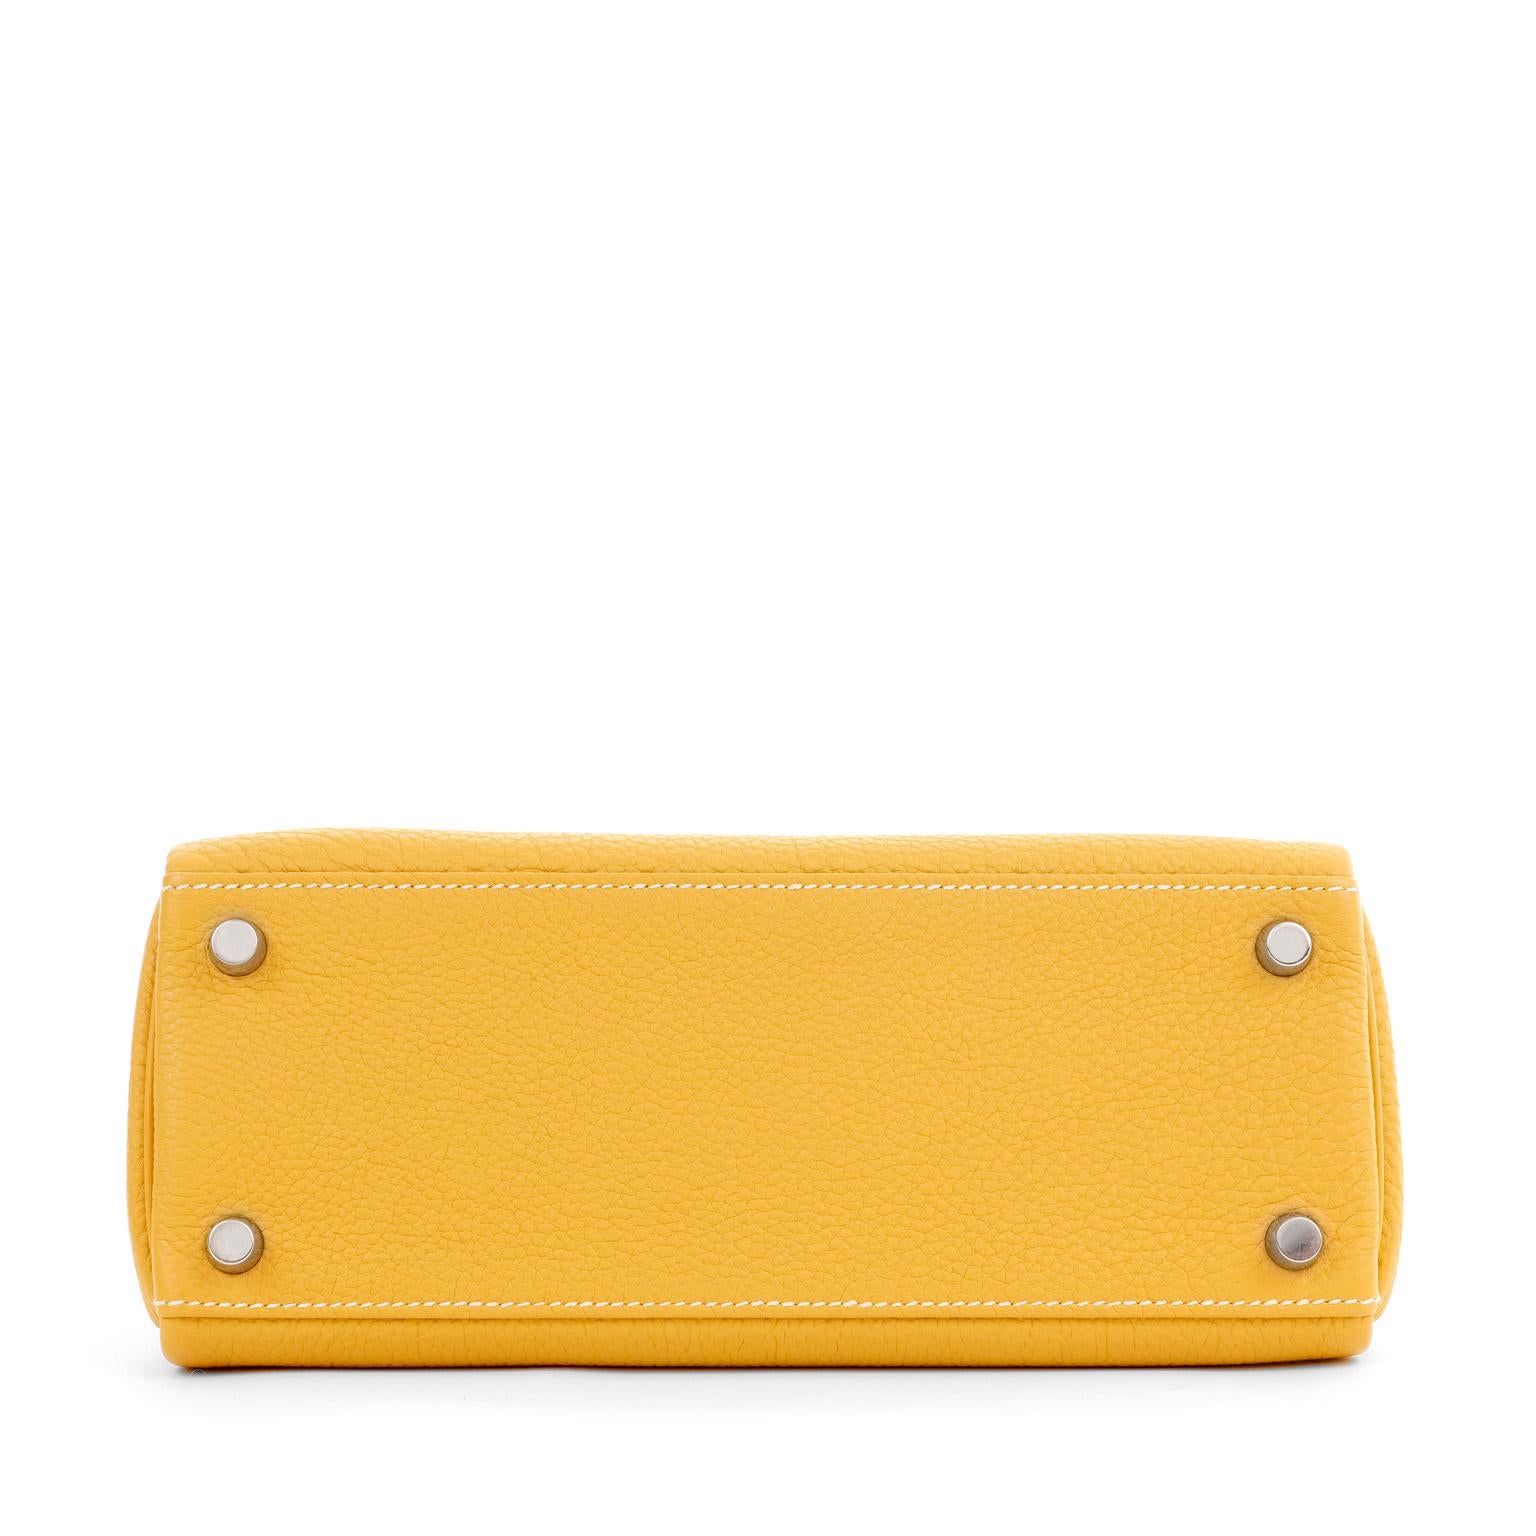 Hermès Mustard Yellow 25 cm Kelly with Palladium In Excellent Condition For Sale In Palm Beach, FL